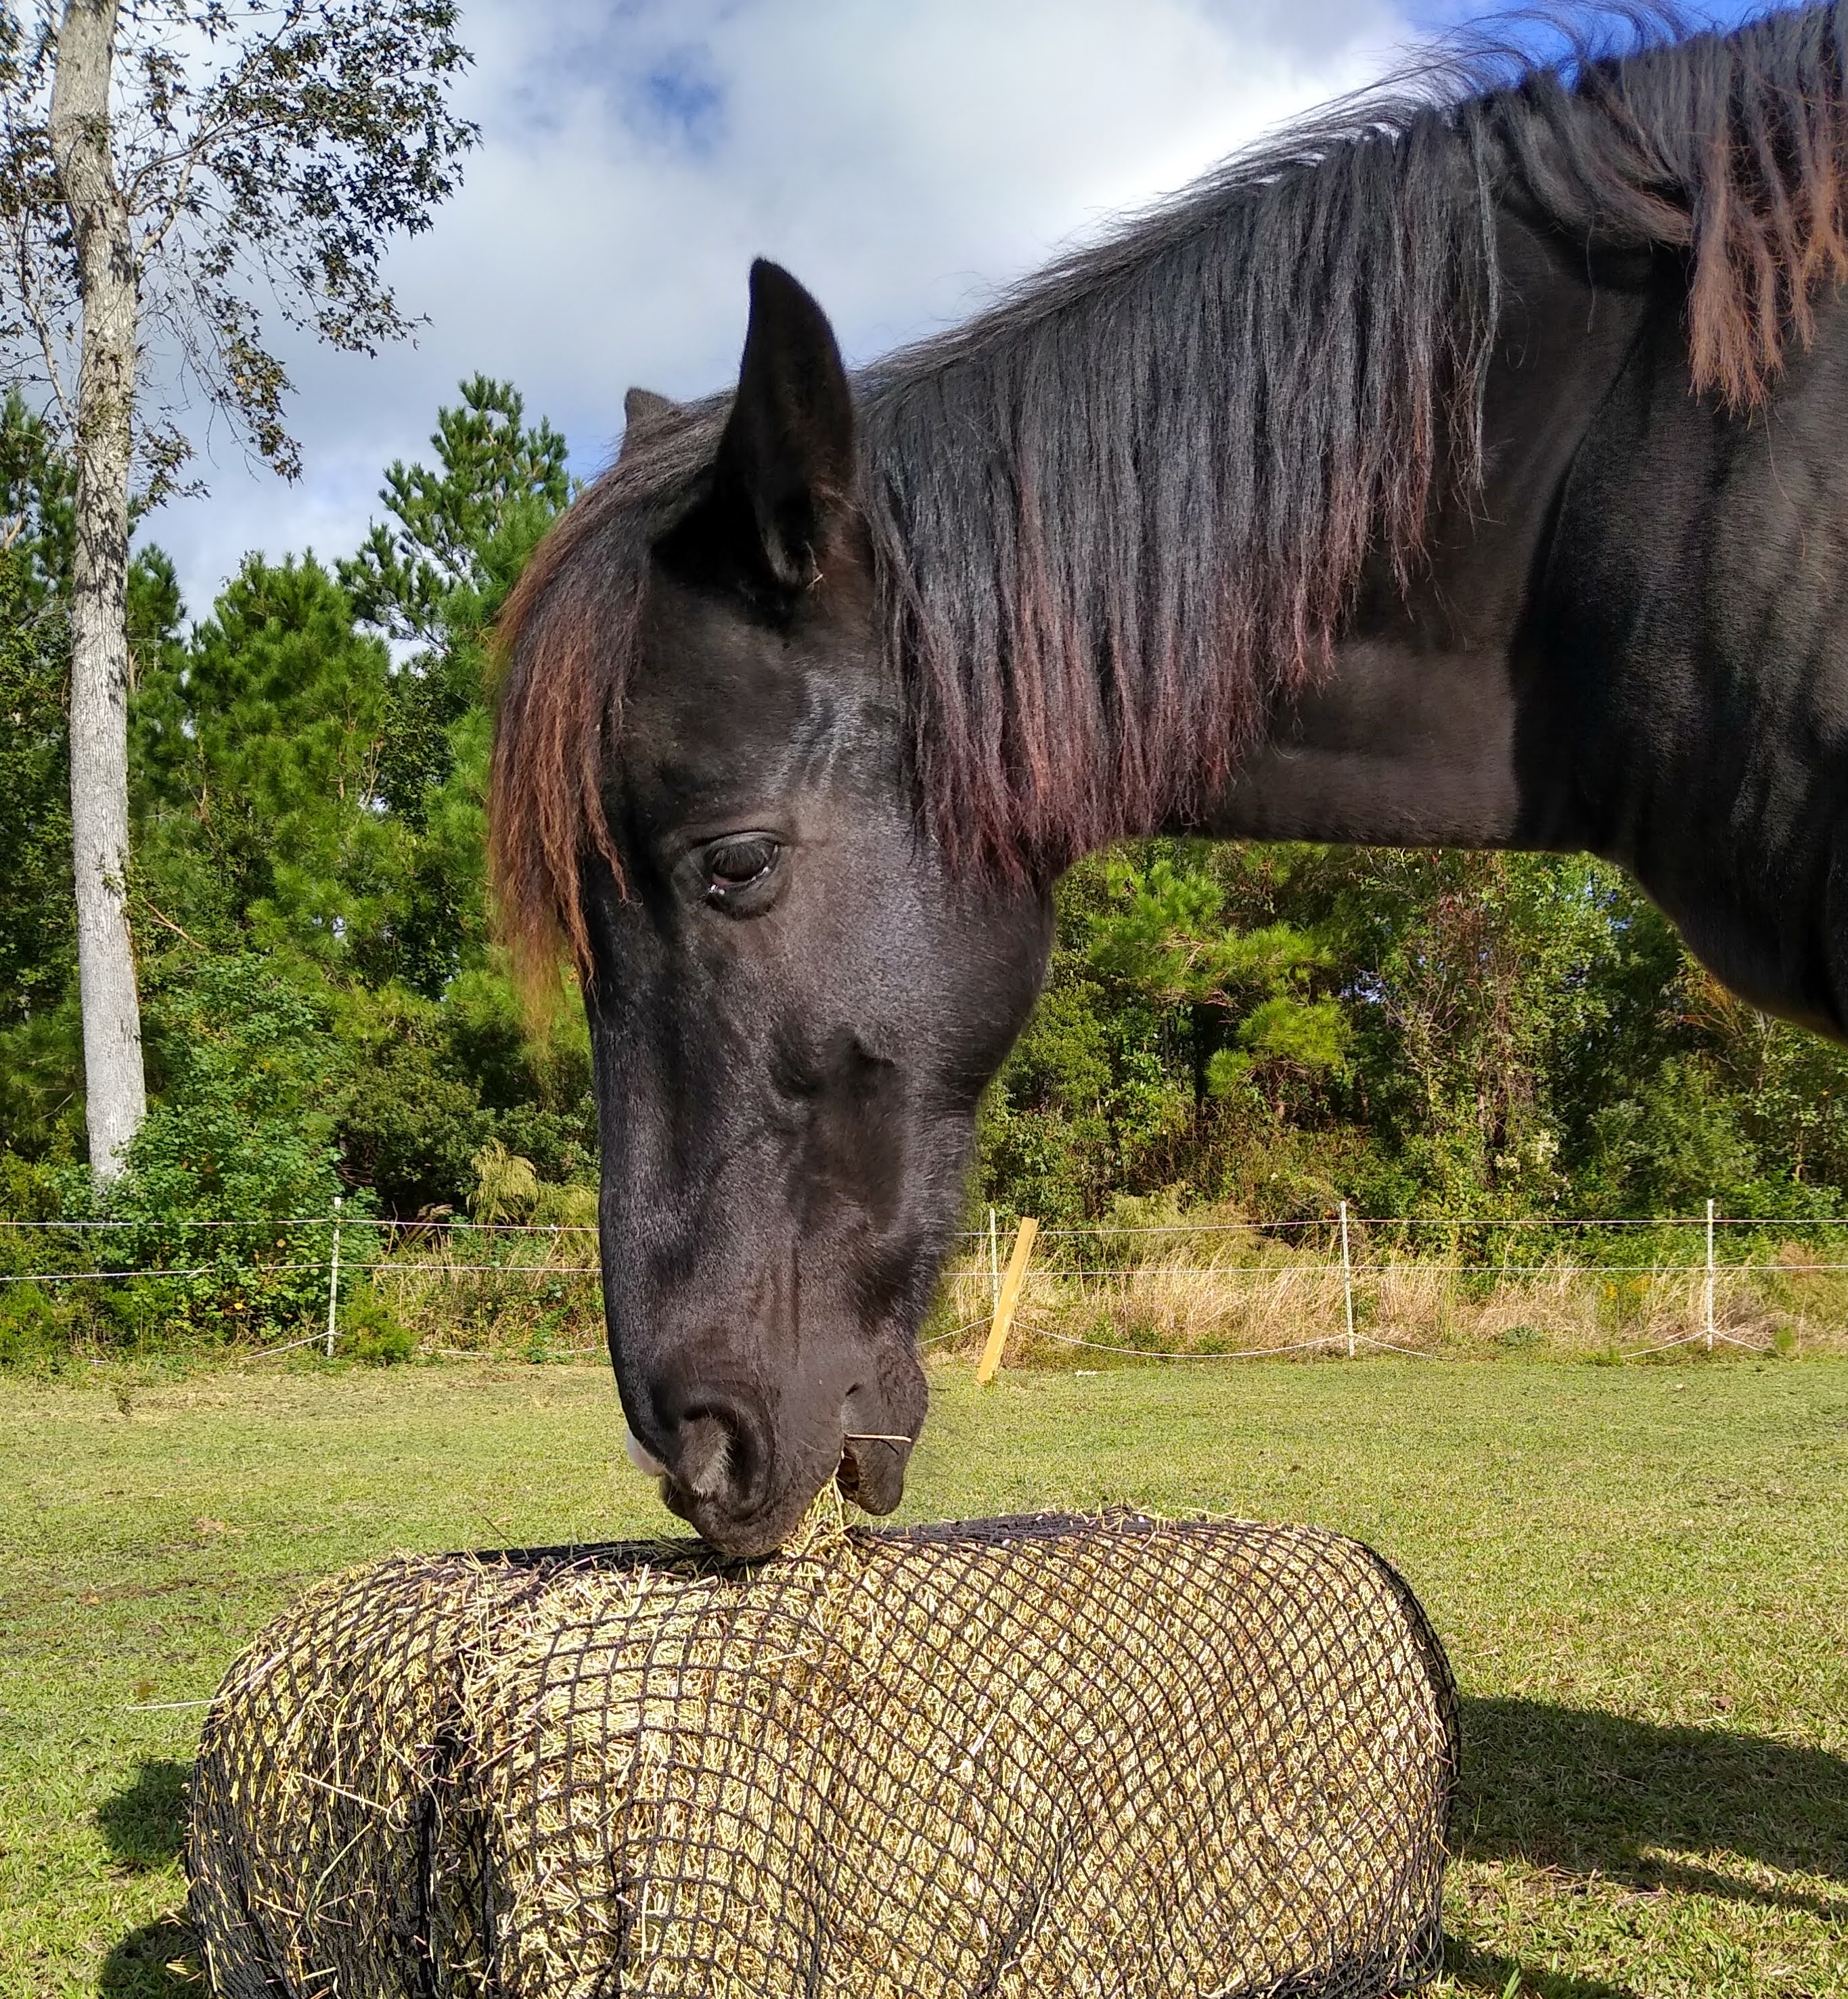 A horse using a hay net as enrichment.